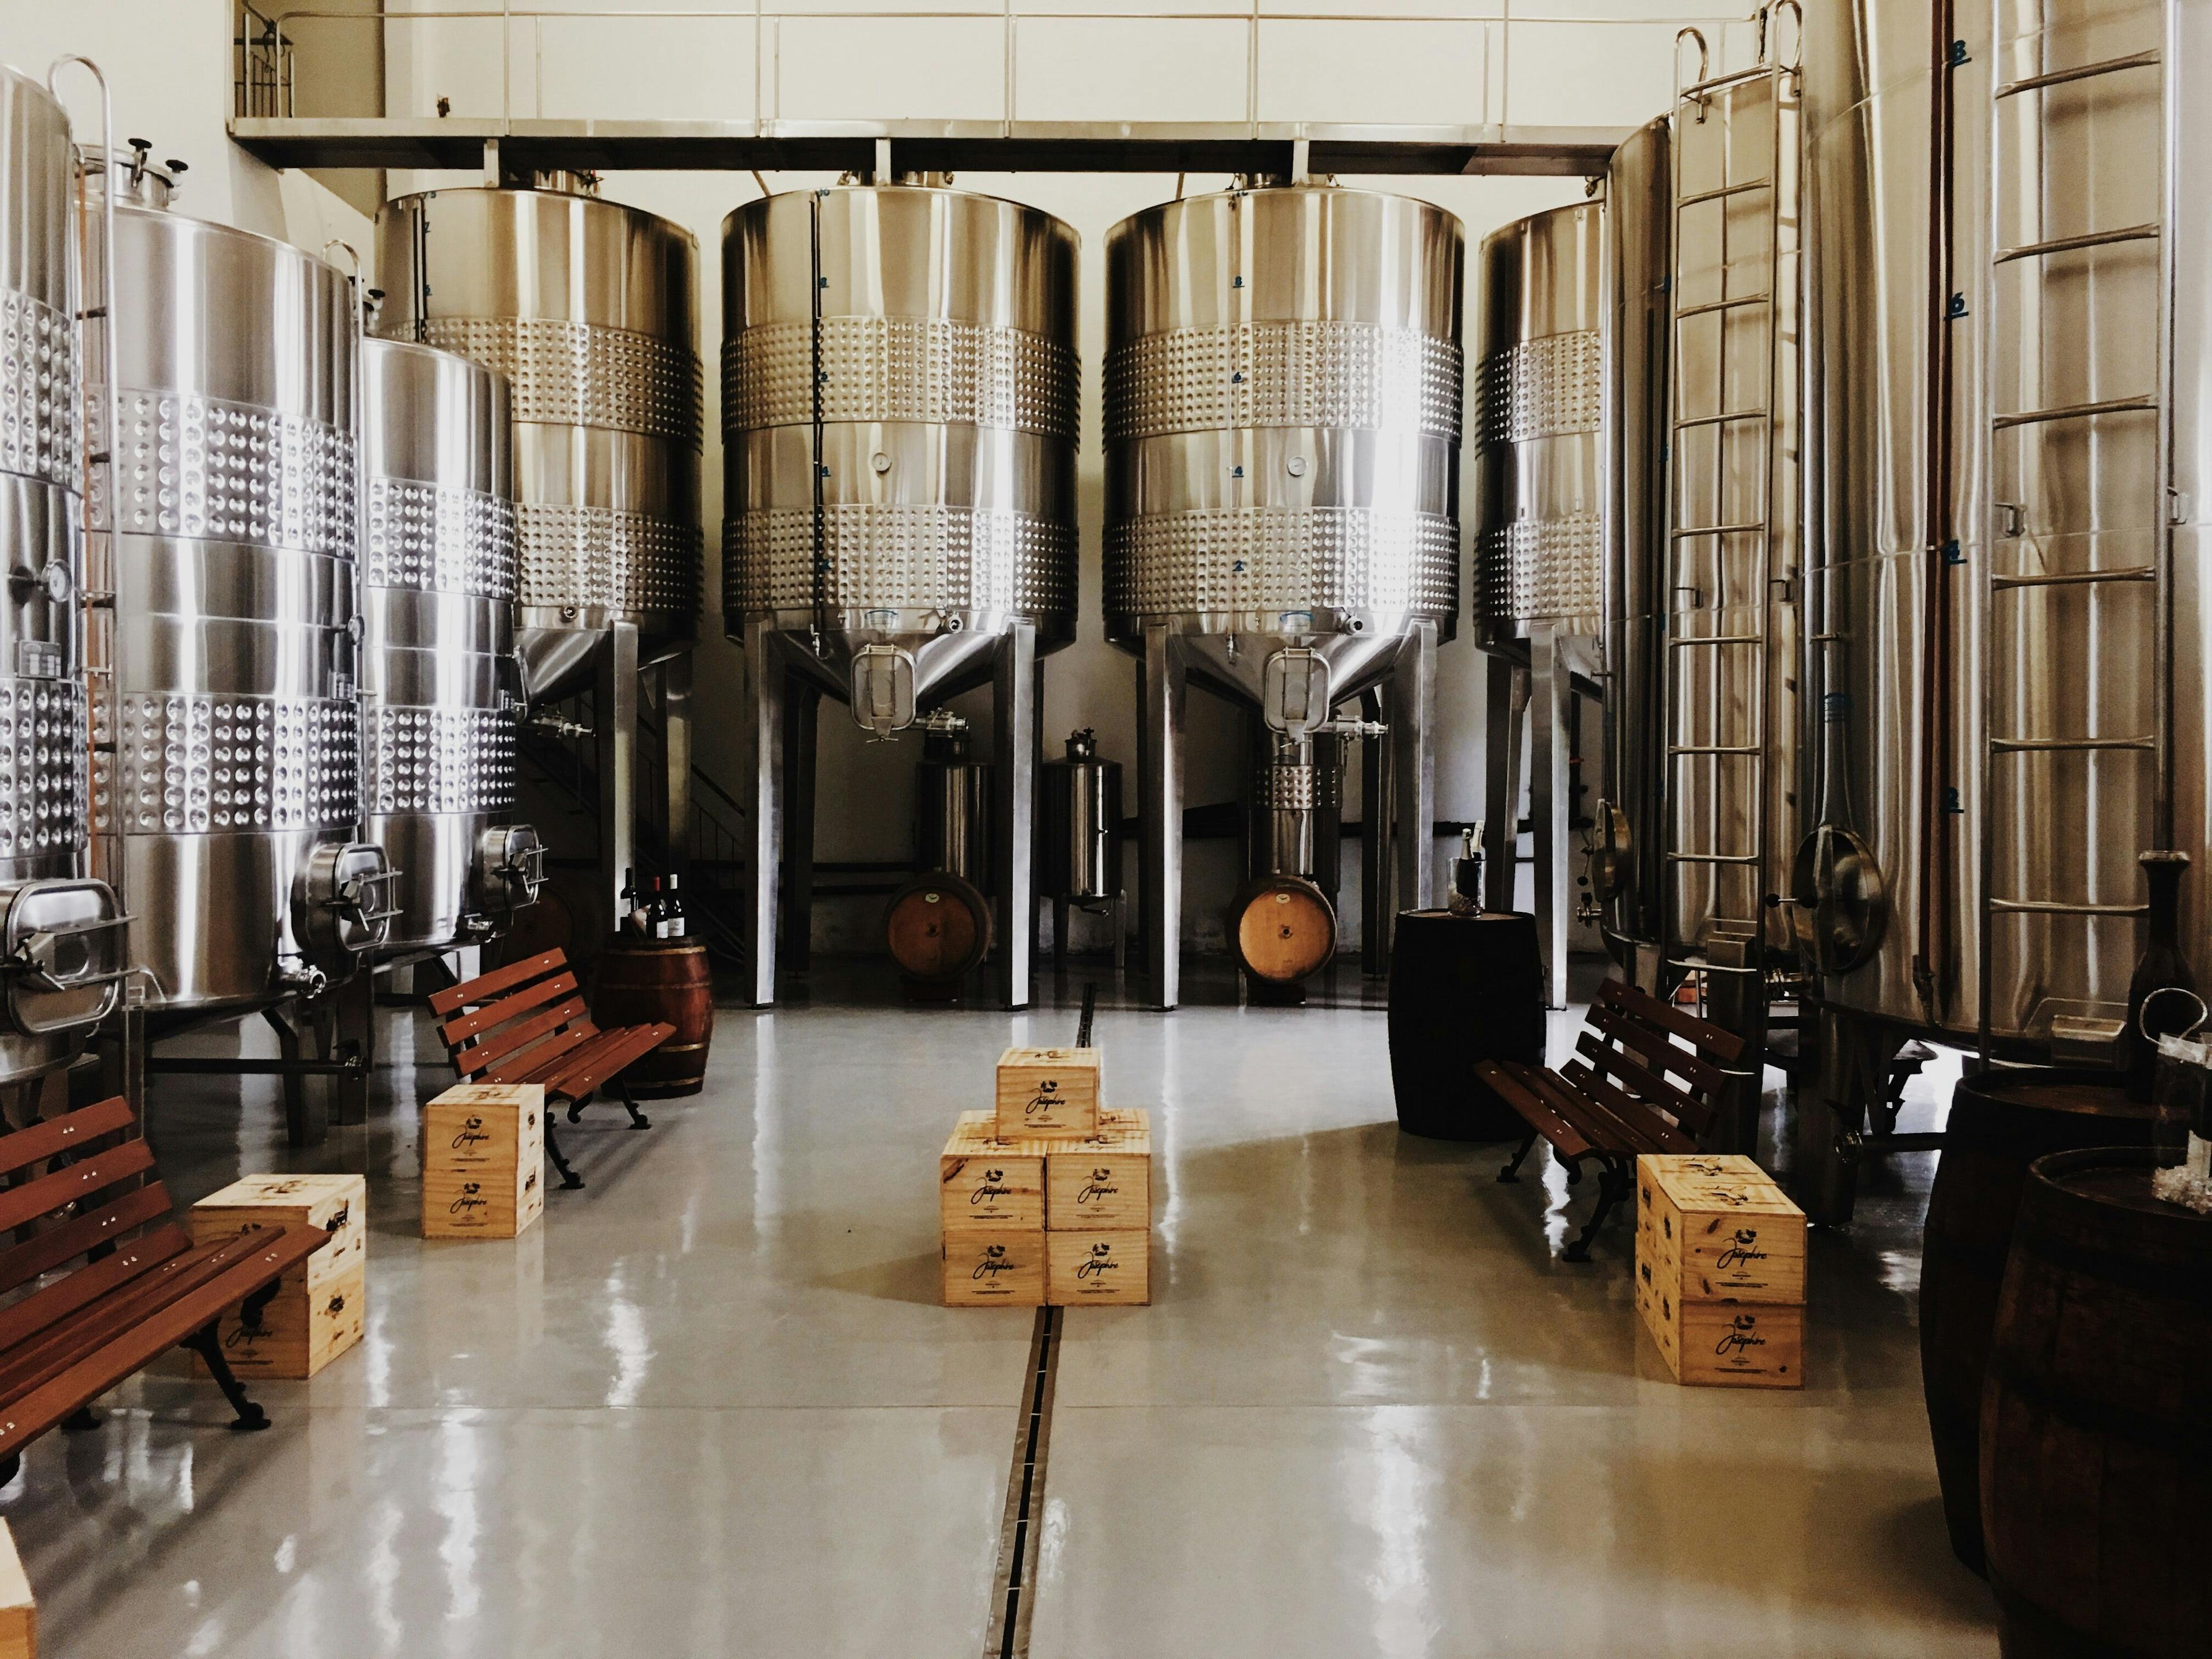 Interior of a Brewery